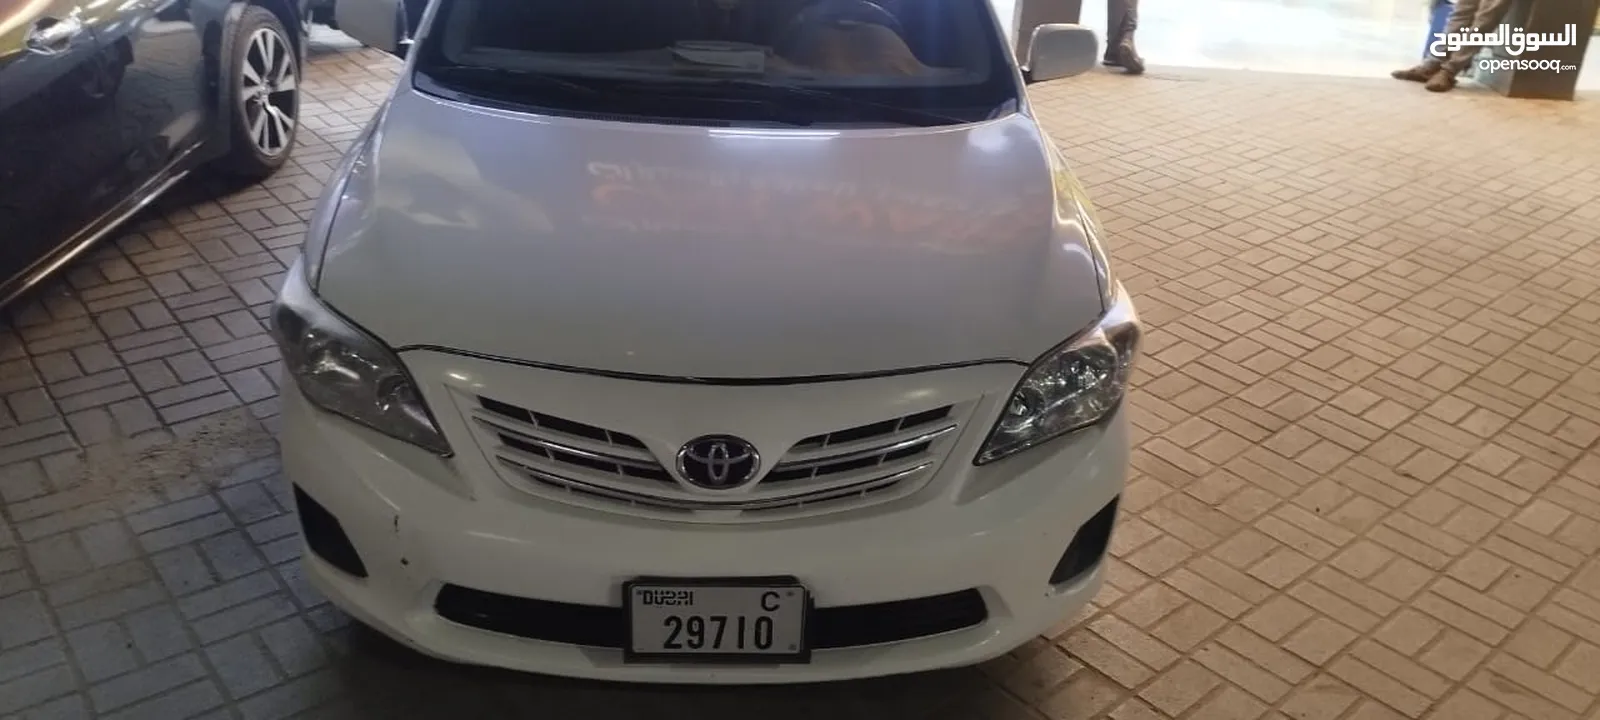 Toyota Corolla Automatic 2013 for sale good condition